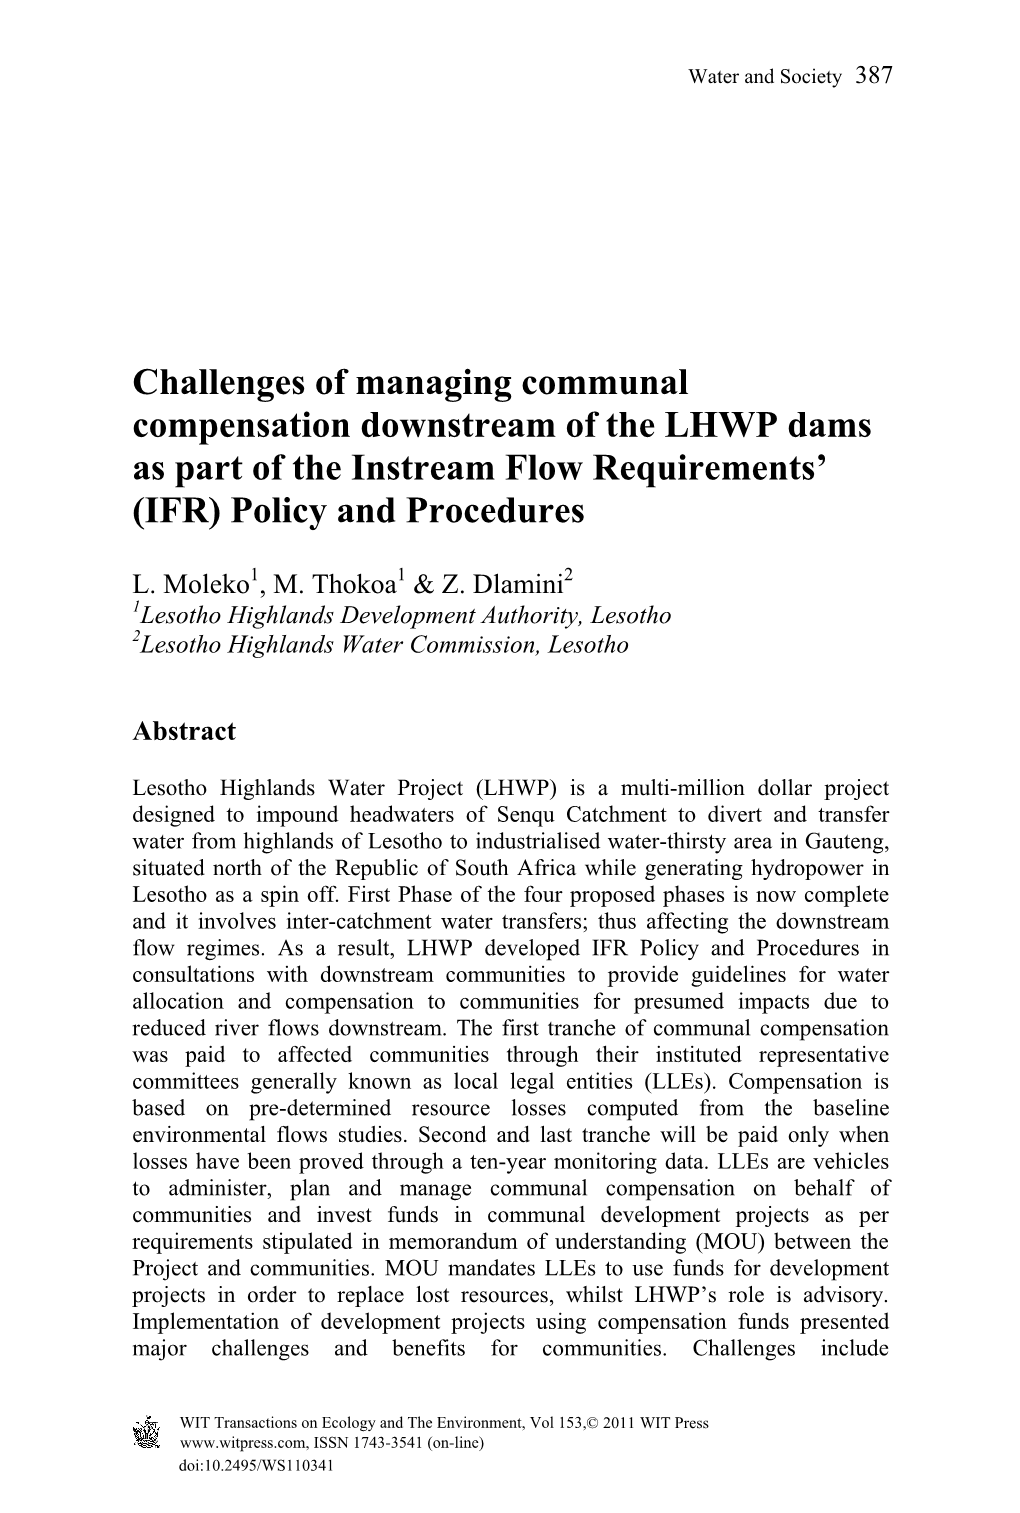 Challenges of Managing Communal Compensation Downstream of the LHWP Dams As Part of the Instream Flow Requirements’ (IFR) Policy and Procedures